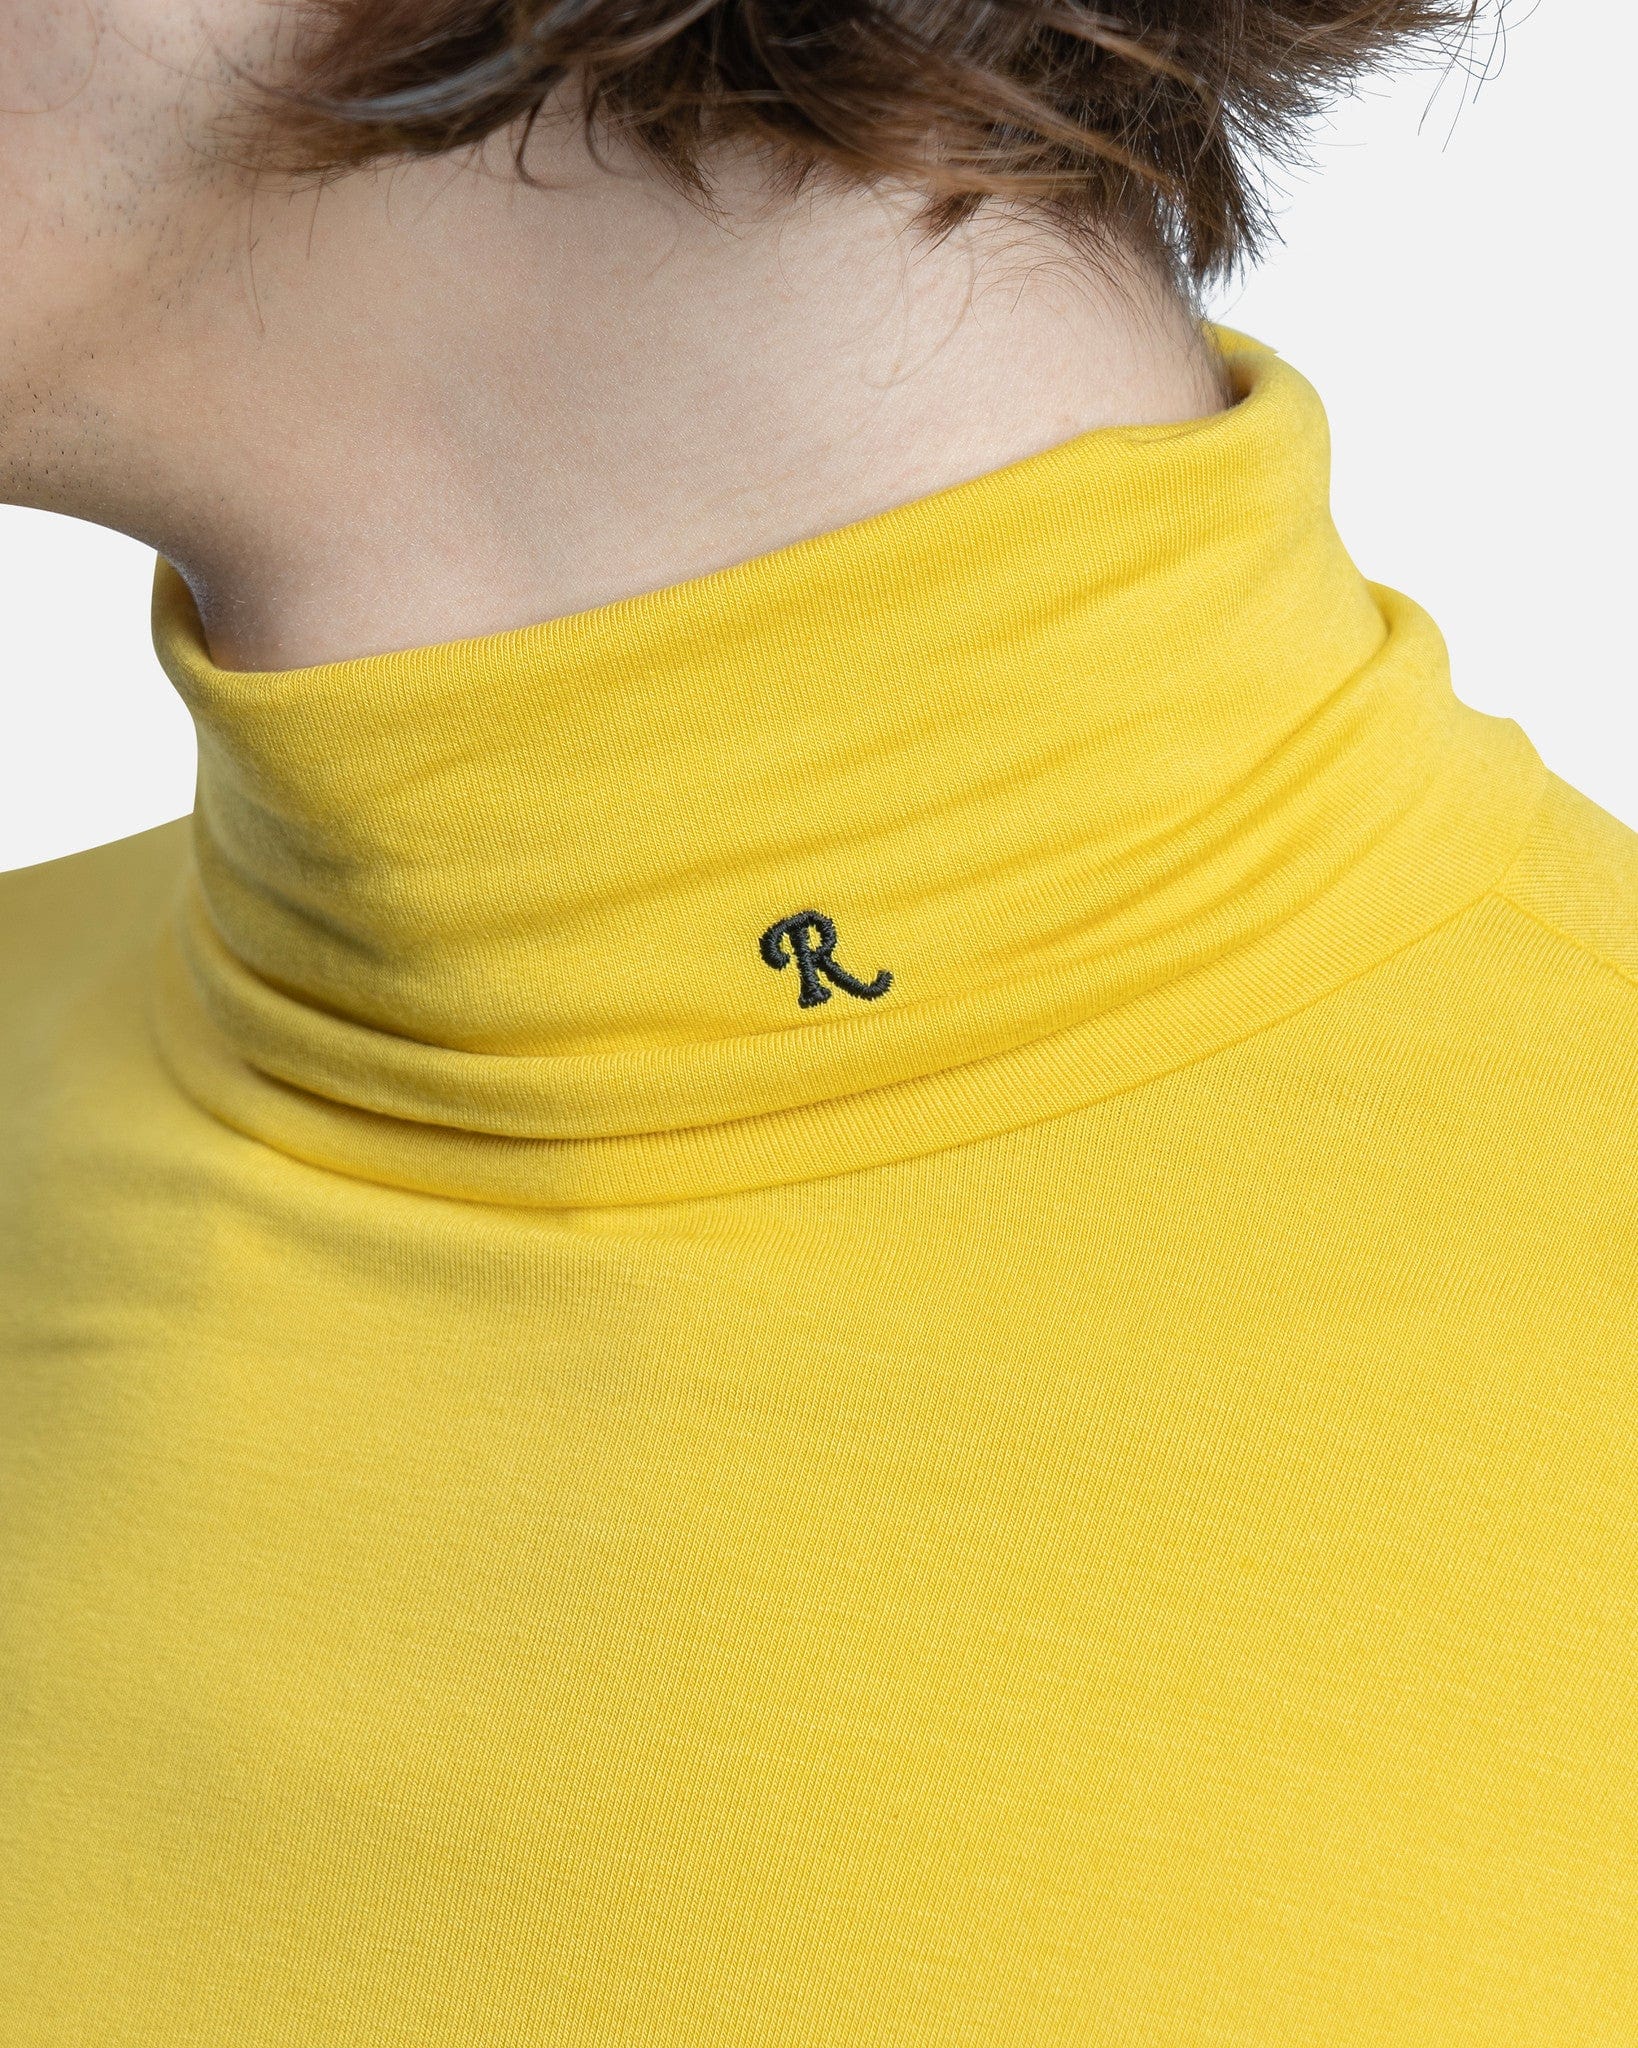 Raf Simons Men's Tops RS Hand Sign Sleeve Print Turtleneck in Yellow